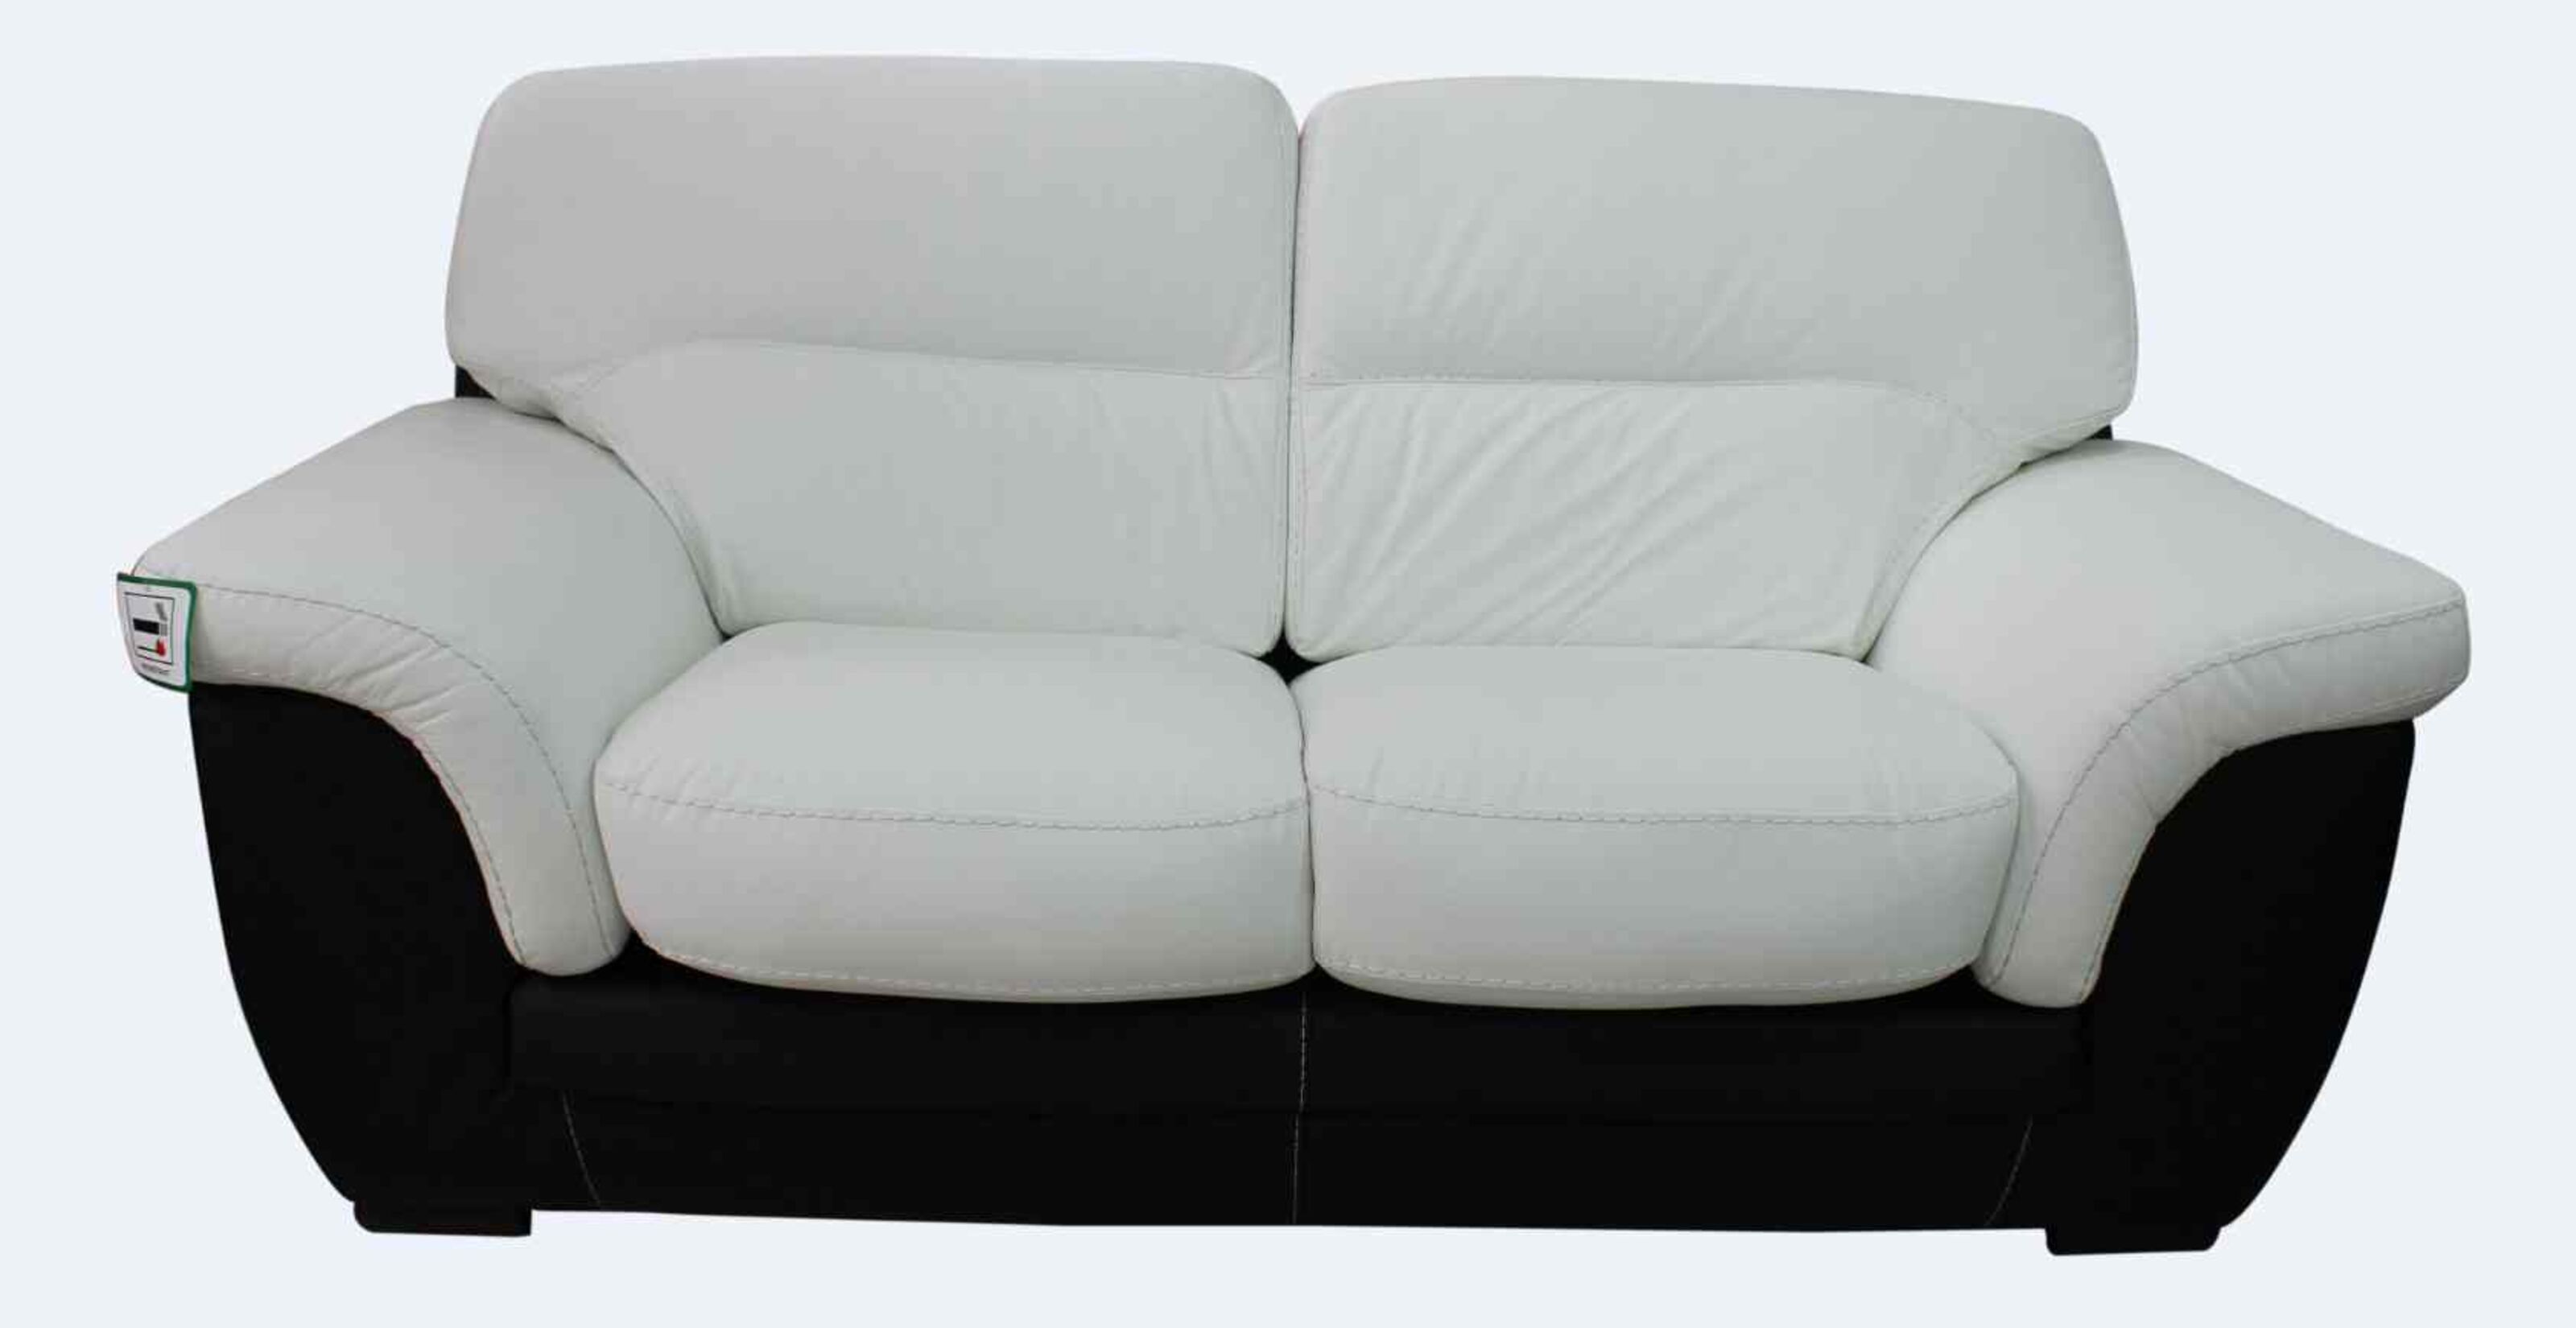 Italian Daniel Leather 2 Seater, Black And White Leather Couch